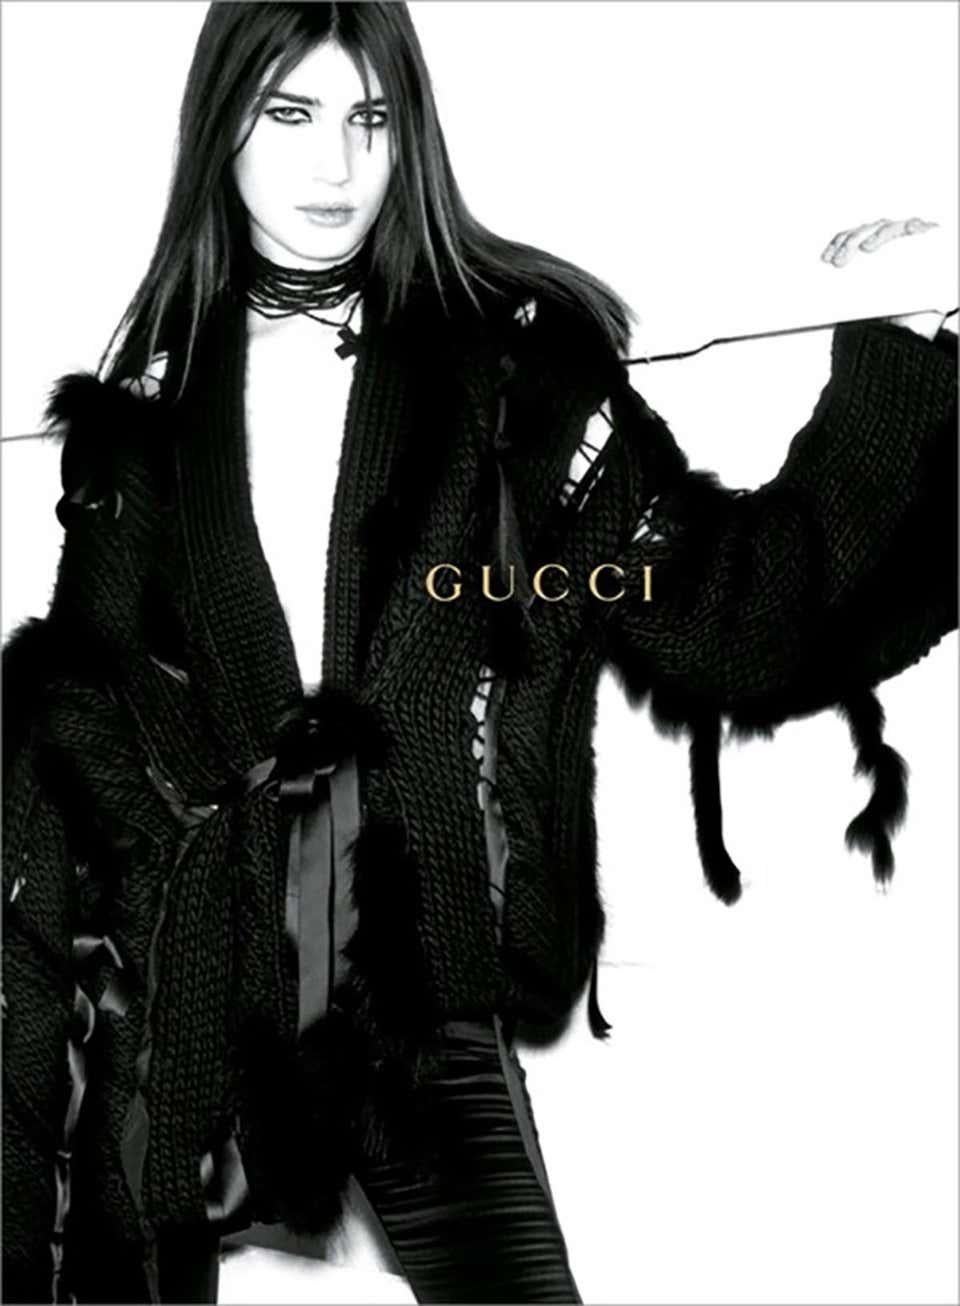 The Most Luxurious GUCCI Sweater Cardigan Ever!
Extremely Rare!
F/W 2002 Collection
Size S ( oversize - will fit bigger sizes also)
Color - Black, 80% Wool
Finished with Silk Ribbons and Genuine FOX Fur Trim Throughout
Made in Italy.
New without